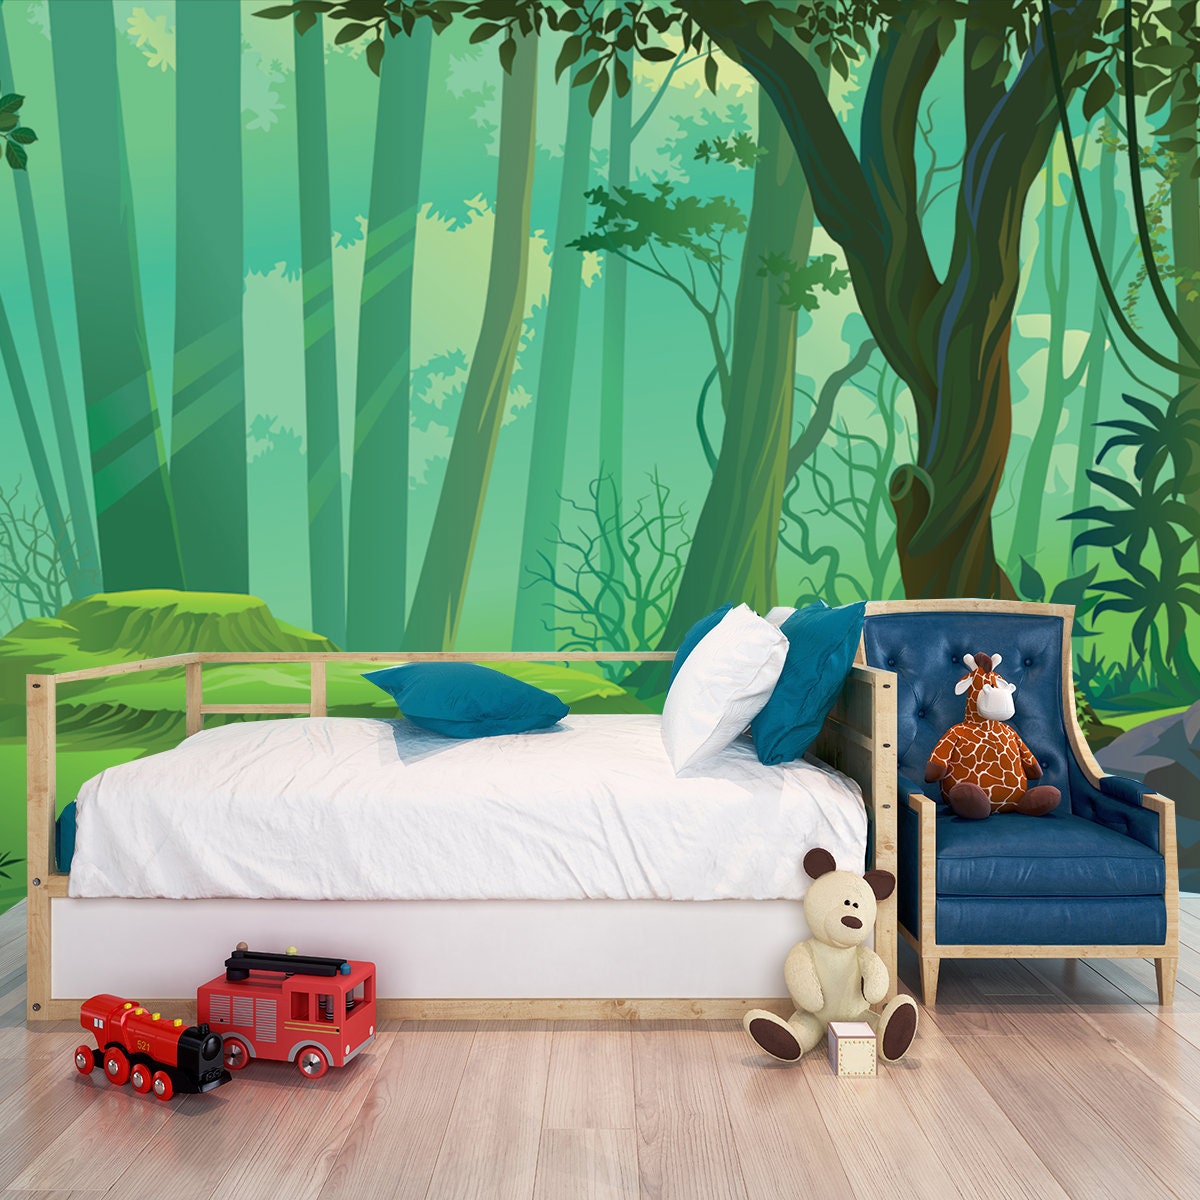 Sun Rays Falling Deep into a Thick Jungle Wallpaper Boy Bedroom Mural